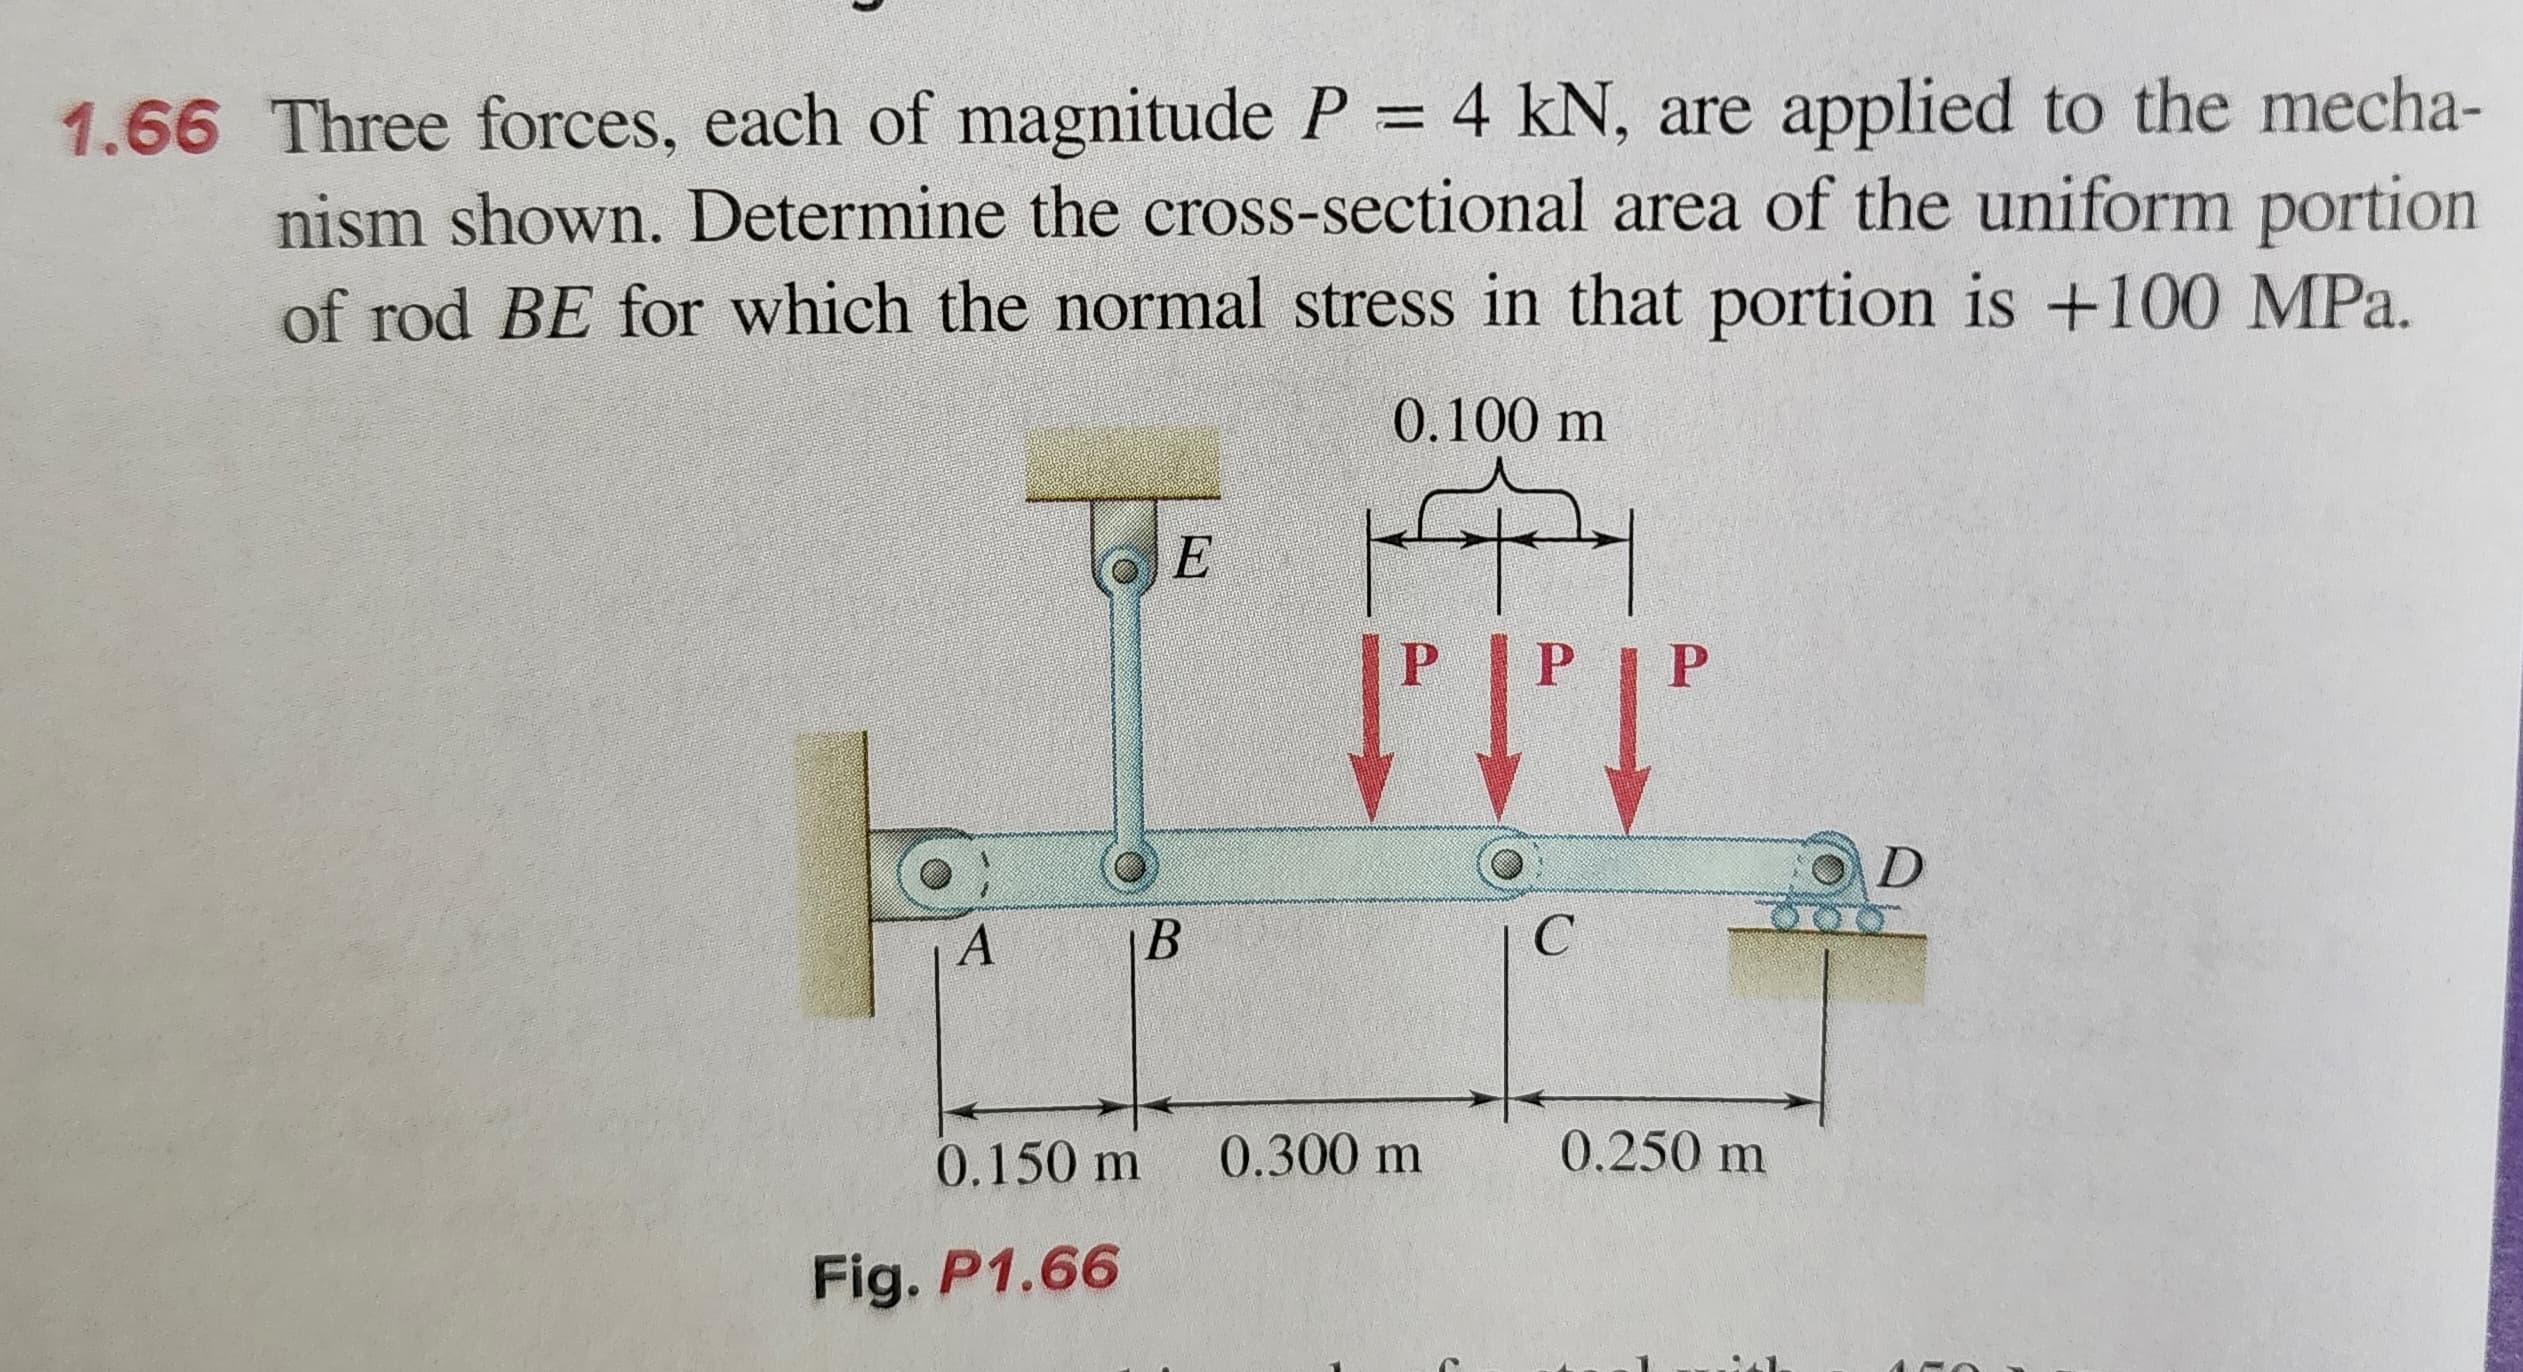 1.66 Three forces, each of magnitude P = 4 kN, are applied to the mecha-
nism shown. Determine the cross-sectional area of the uniform portion
of rod BE for which the normal stress in that portion is +100 MPa.
A
E
Fig. P1.66
B
0.100 m
HAI
P
0.150 m 0.300 m
PIP
C
0.250 m
D